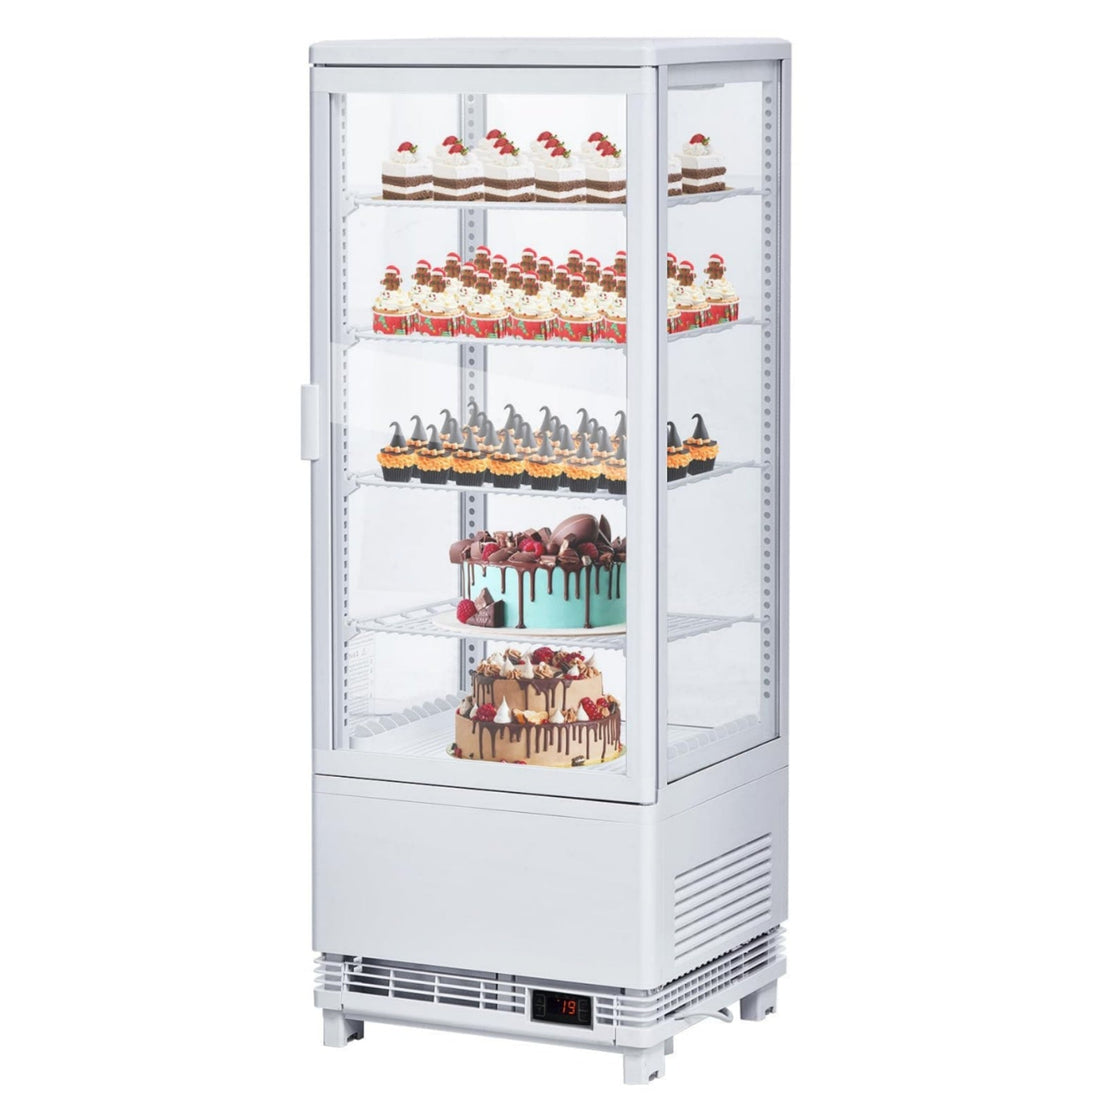 Commercial Refrigerator Display Case, 110v 3.5 Cu.FT Single-Door Countertop Pastry Display Case with Interior LED Lighting, Double-Layered Glass, Countertop/Floor Refrigerator